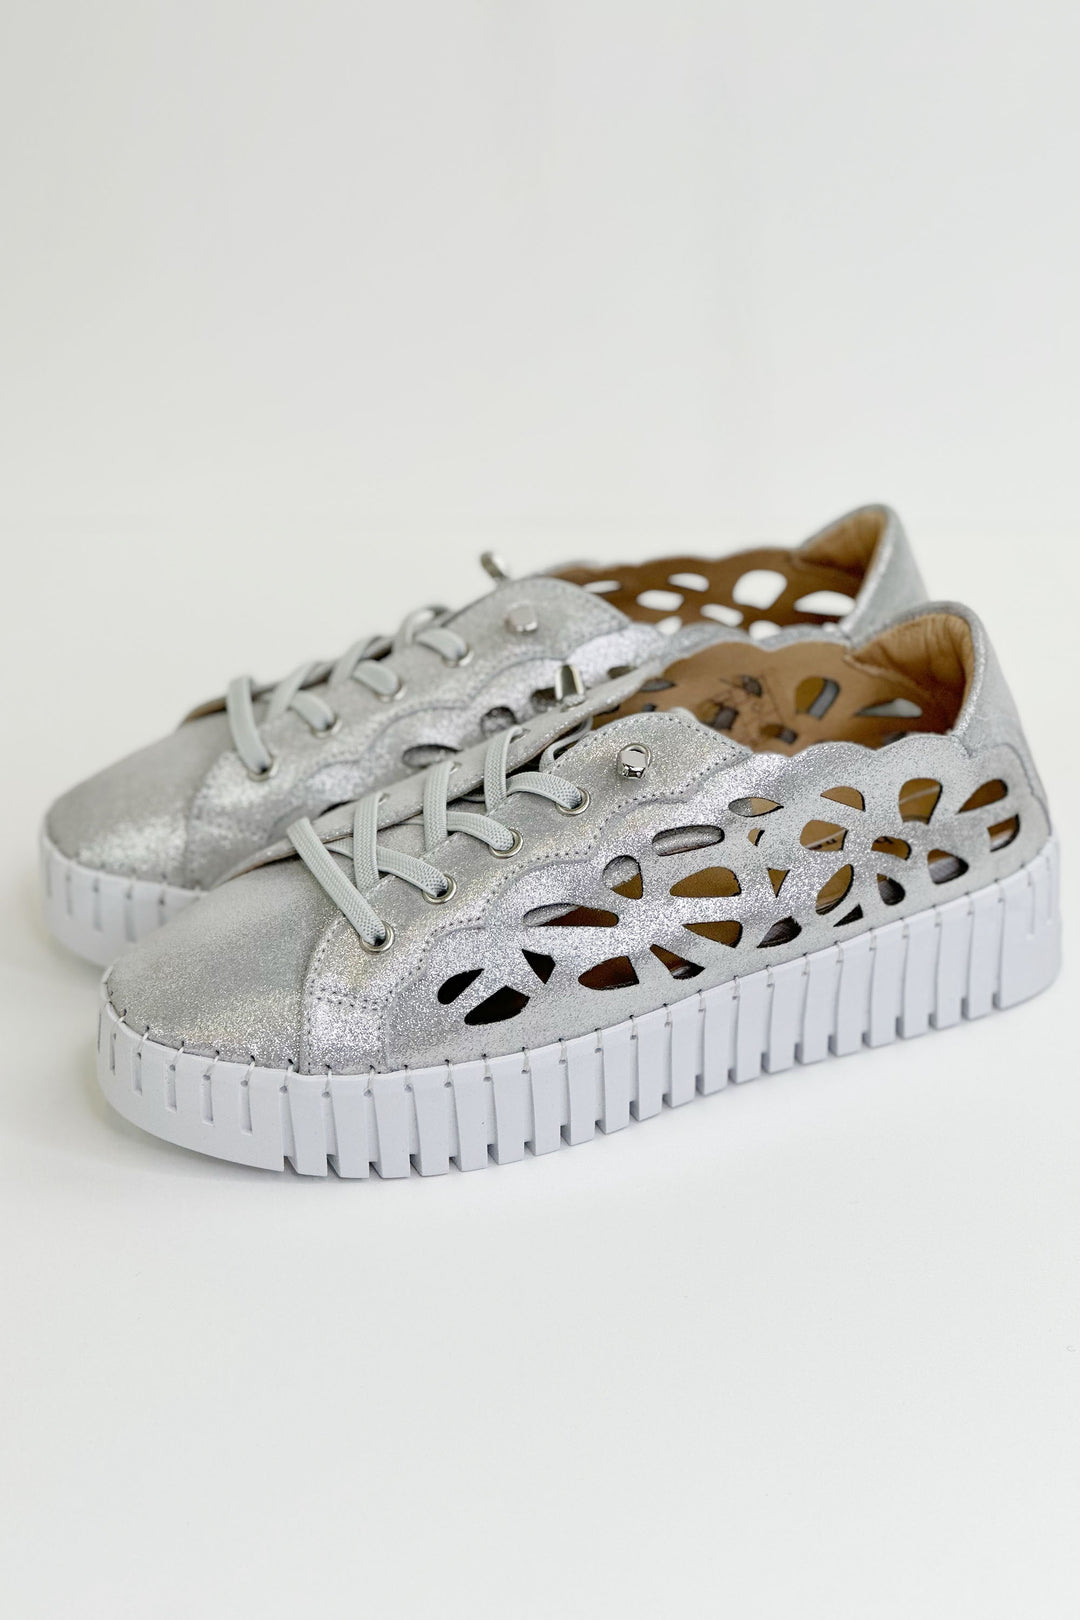 Bernie Mev Spring 2024 This stunning slip-on sneaker features a stretchy knit upper, sparkle shine finish eyelet siding design pattern, lace up details and Bernie Mev’s signature memory foam footbed.